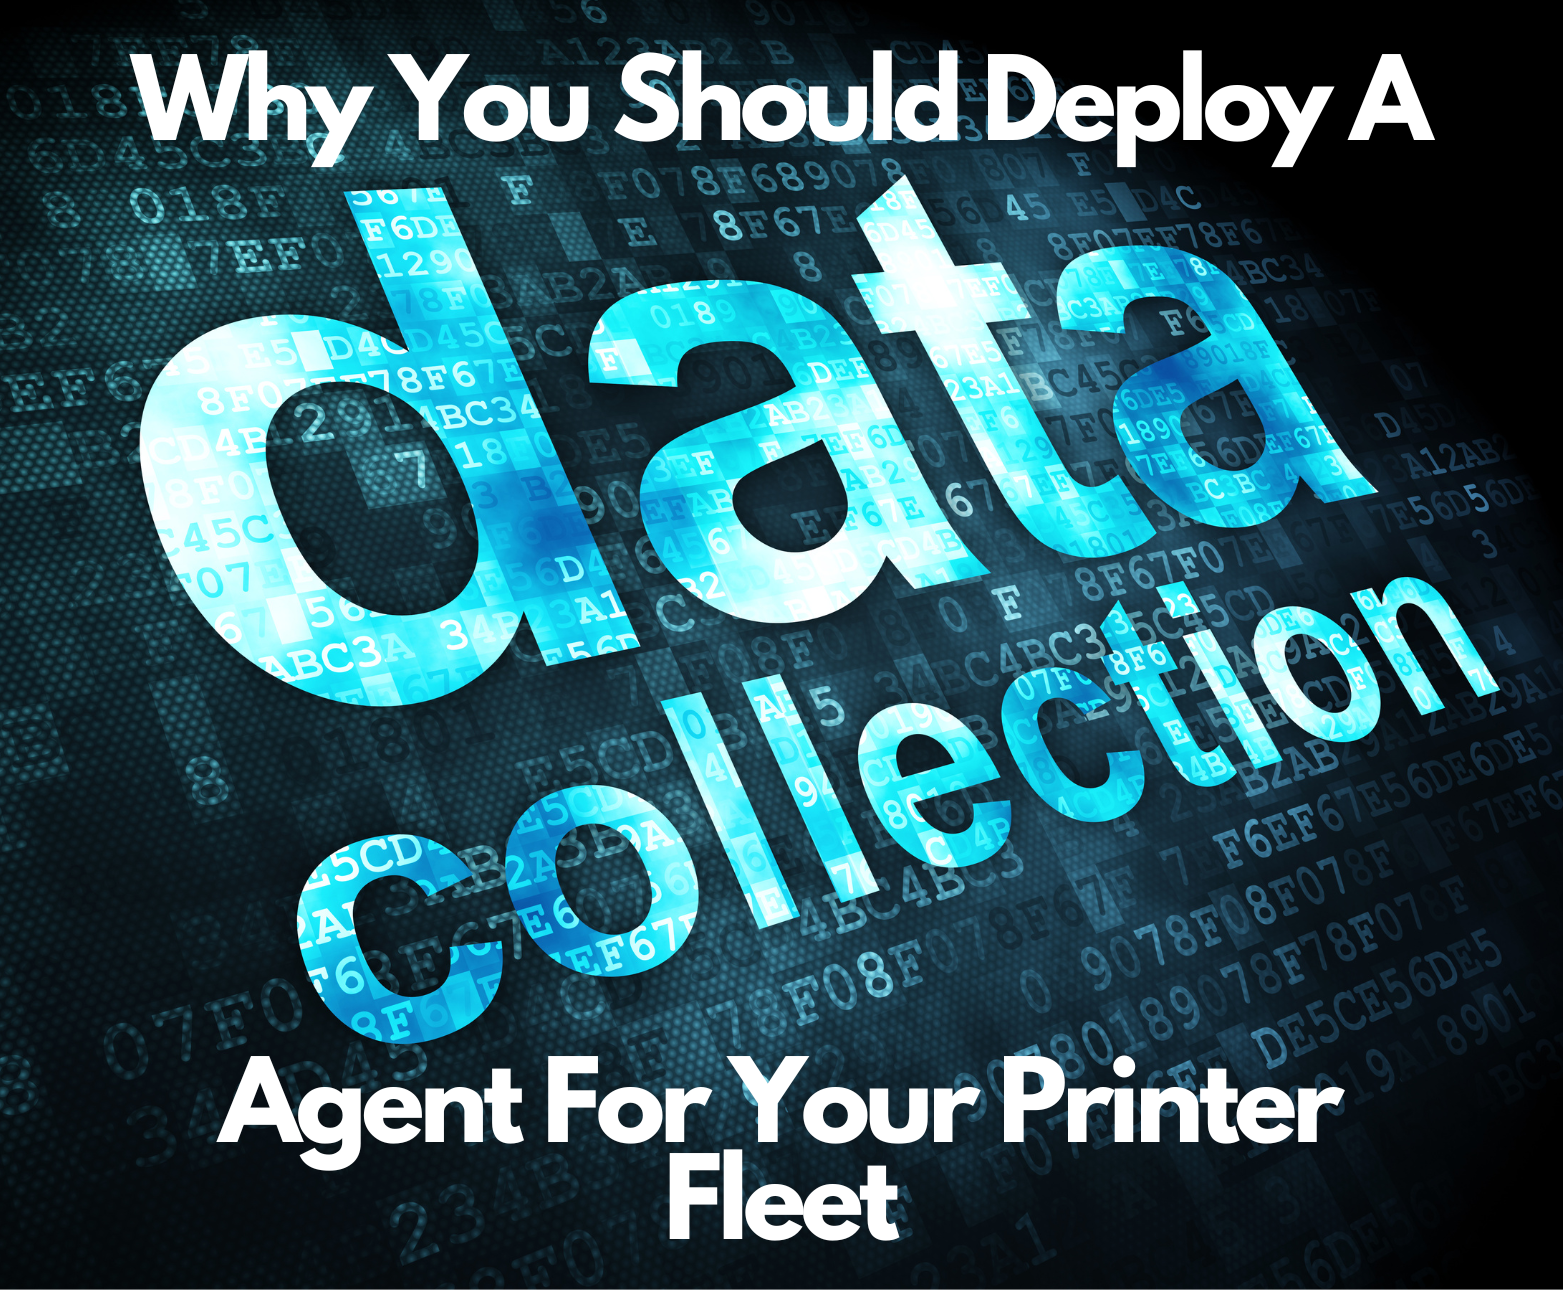 Deploy a Data Collection Agent for Your Printer Fleet